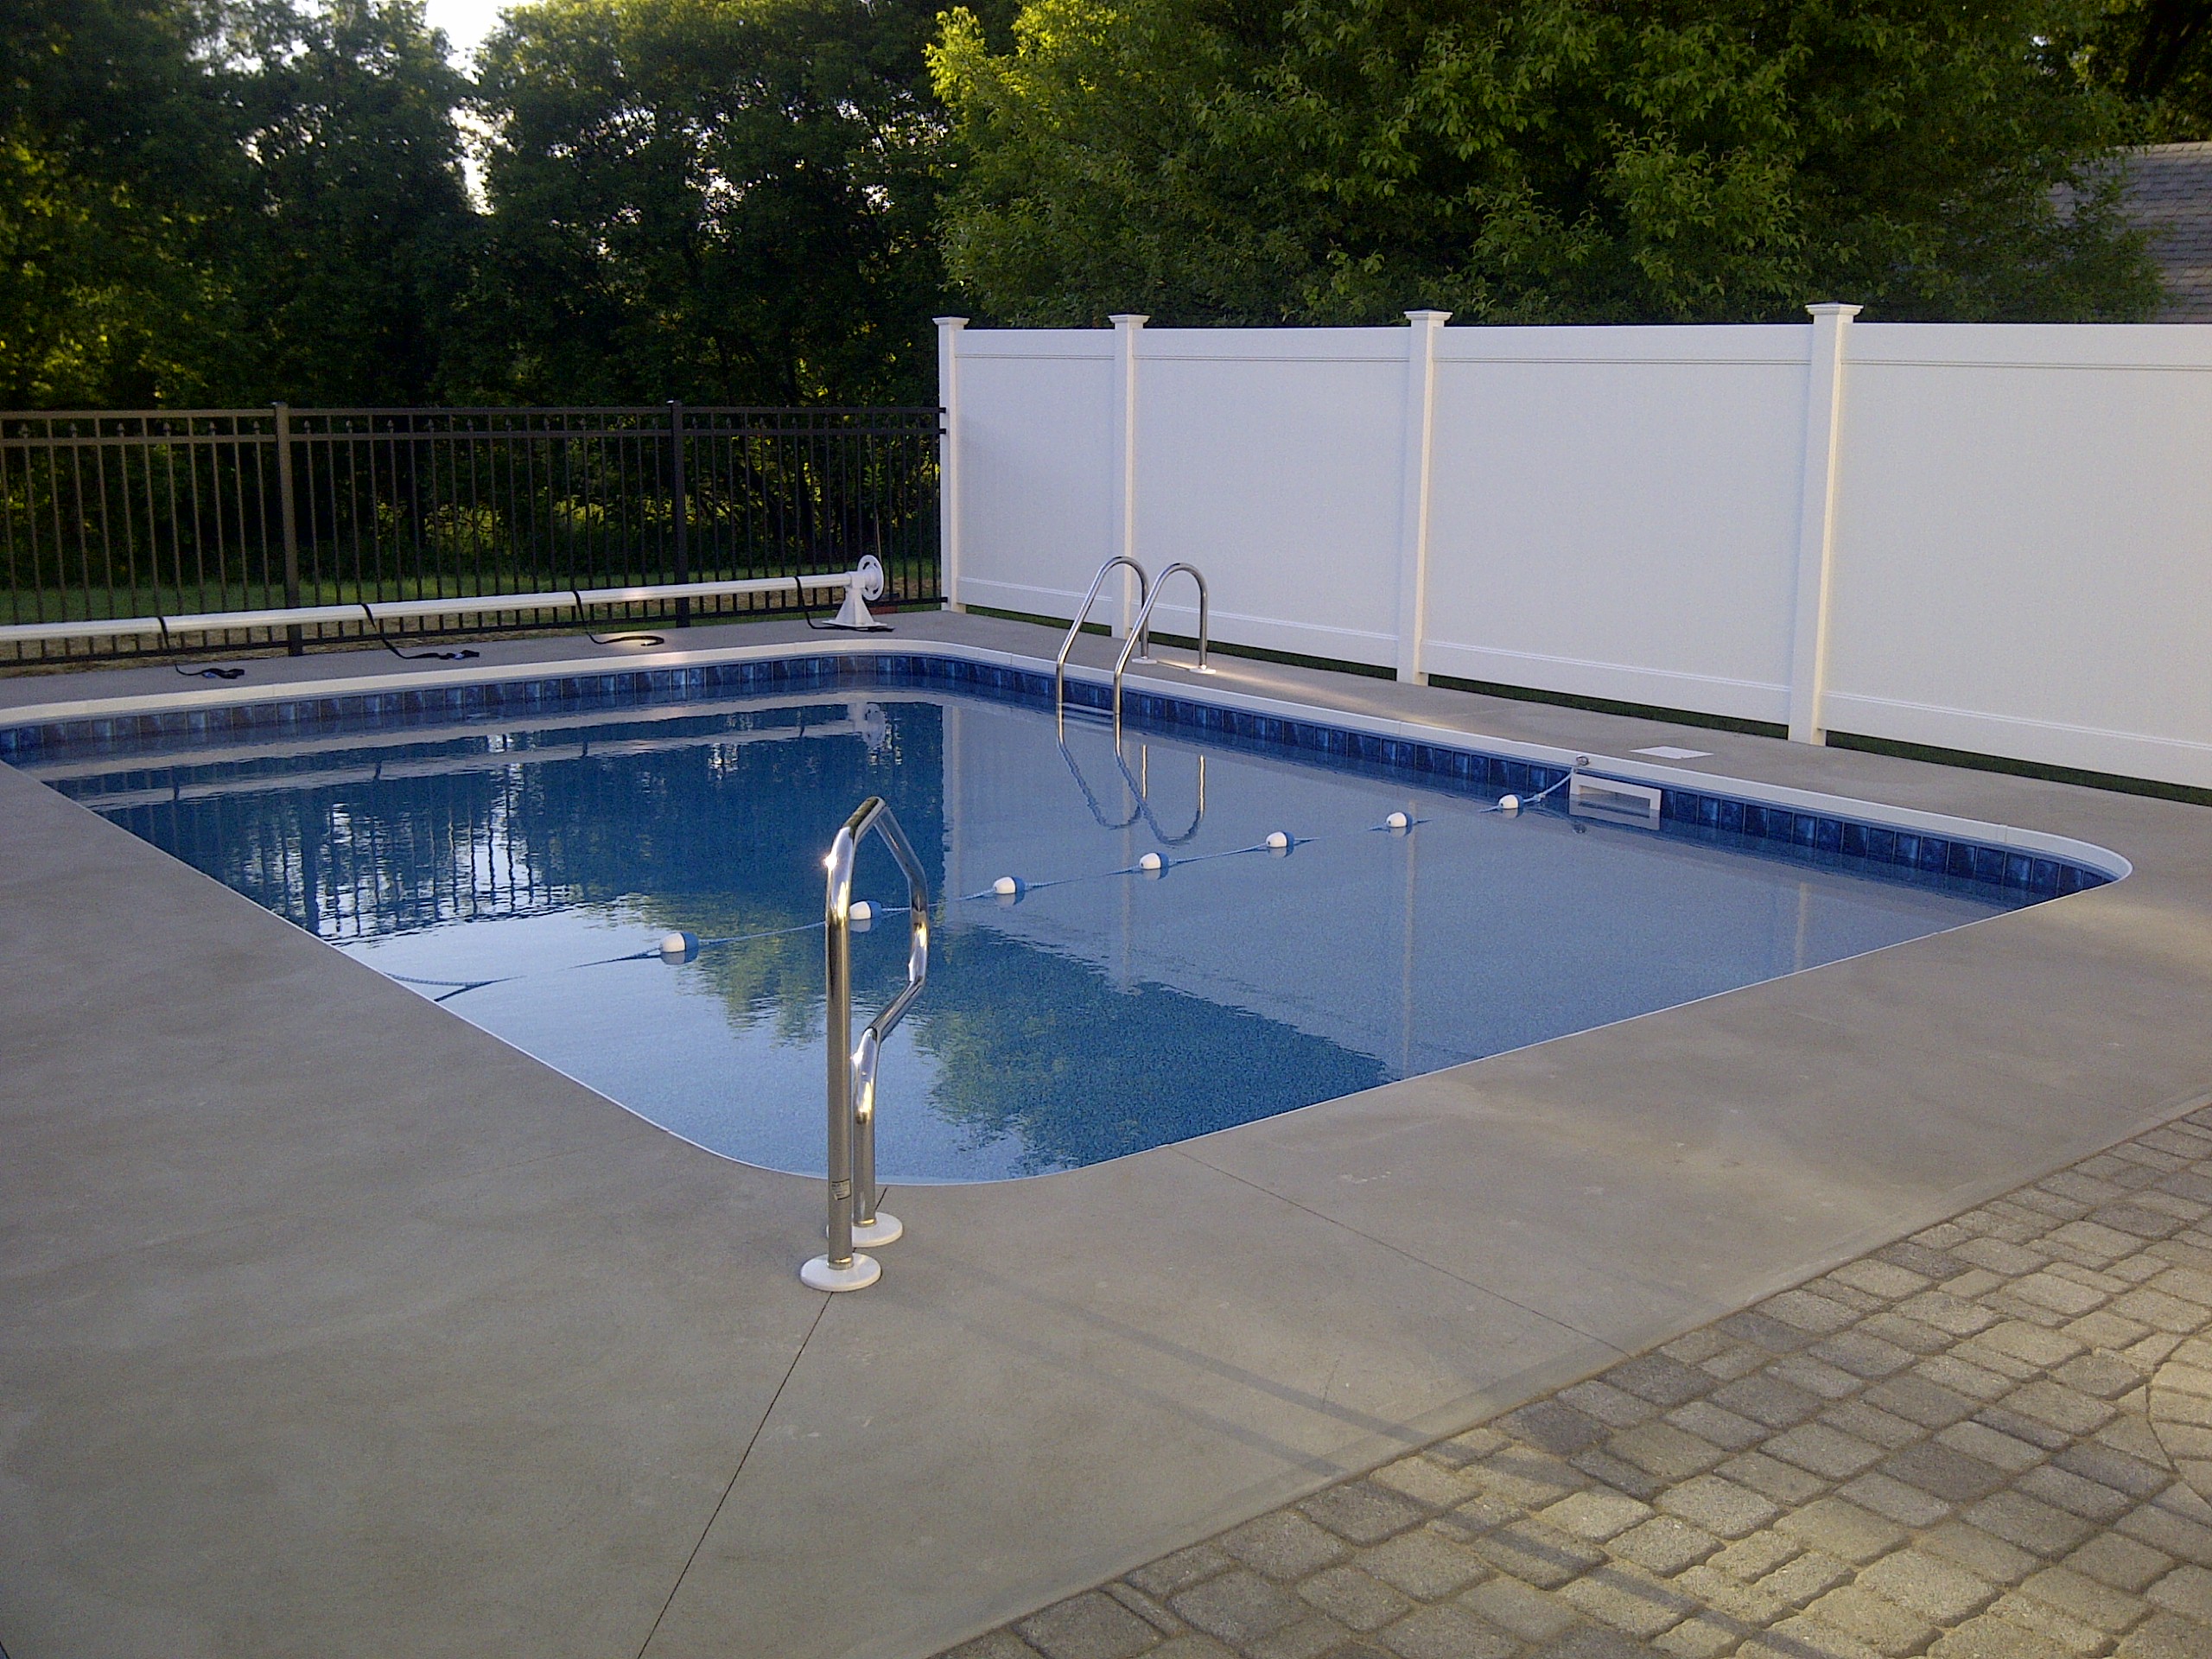 fencing around pool